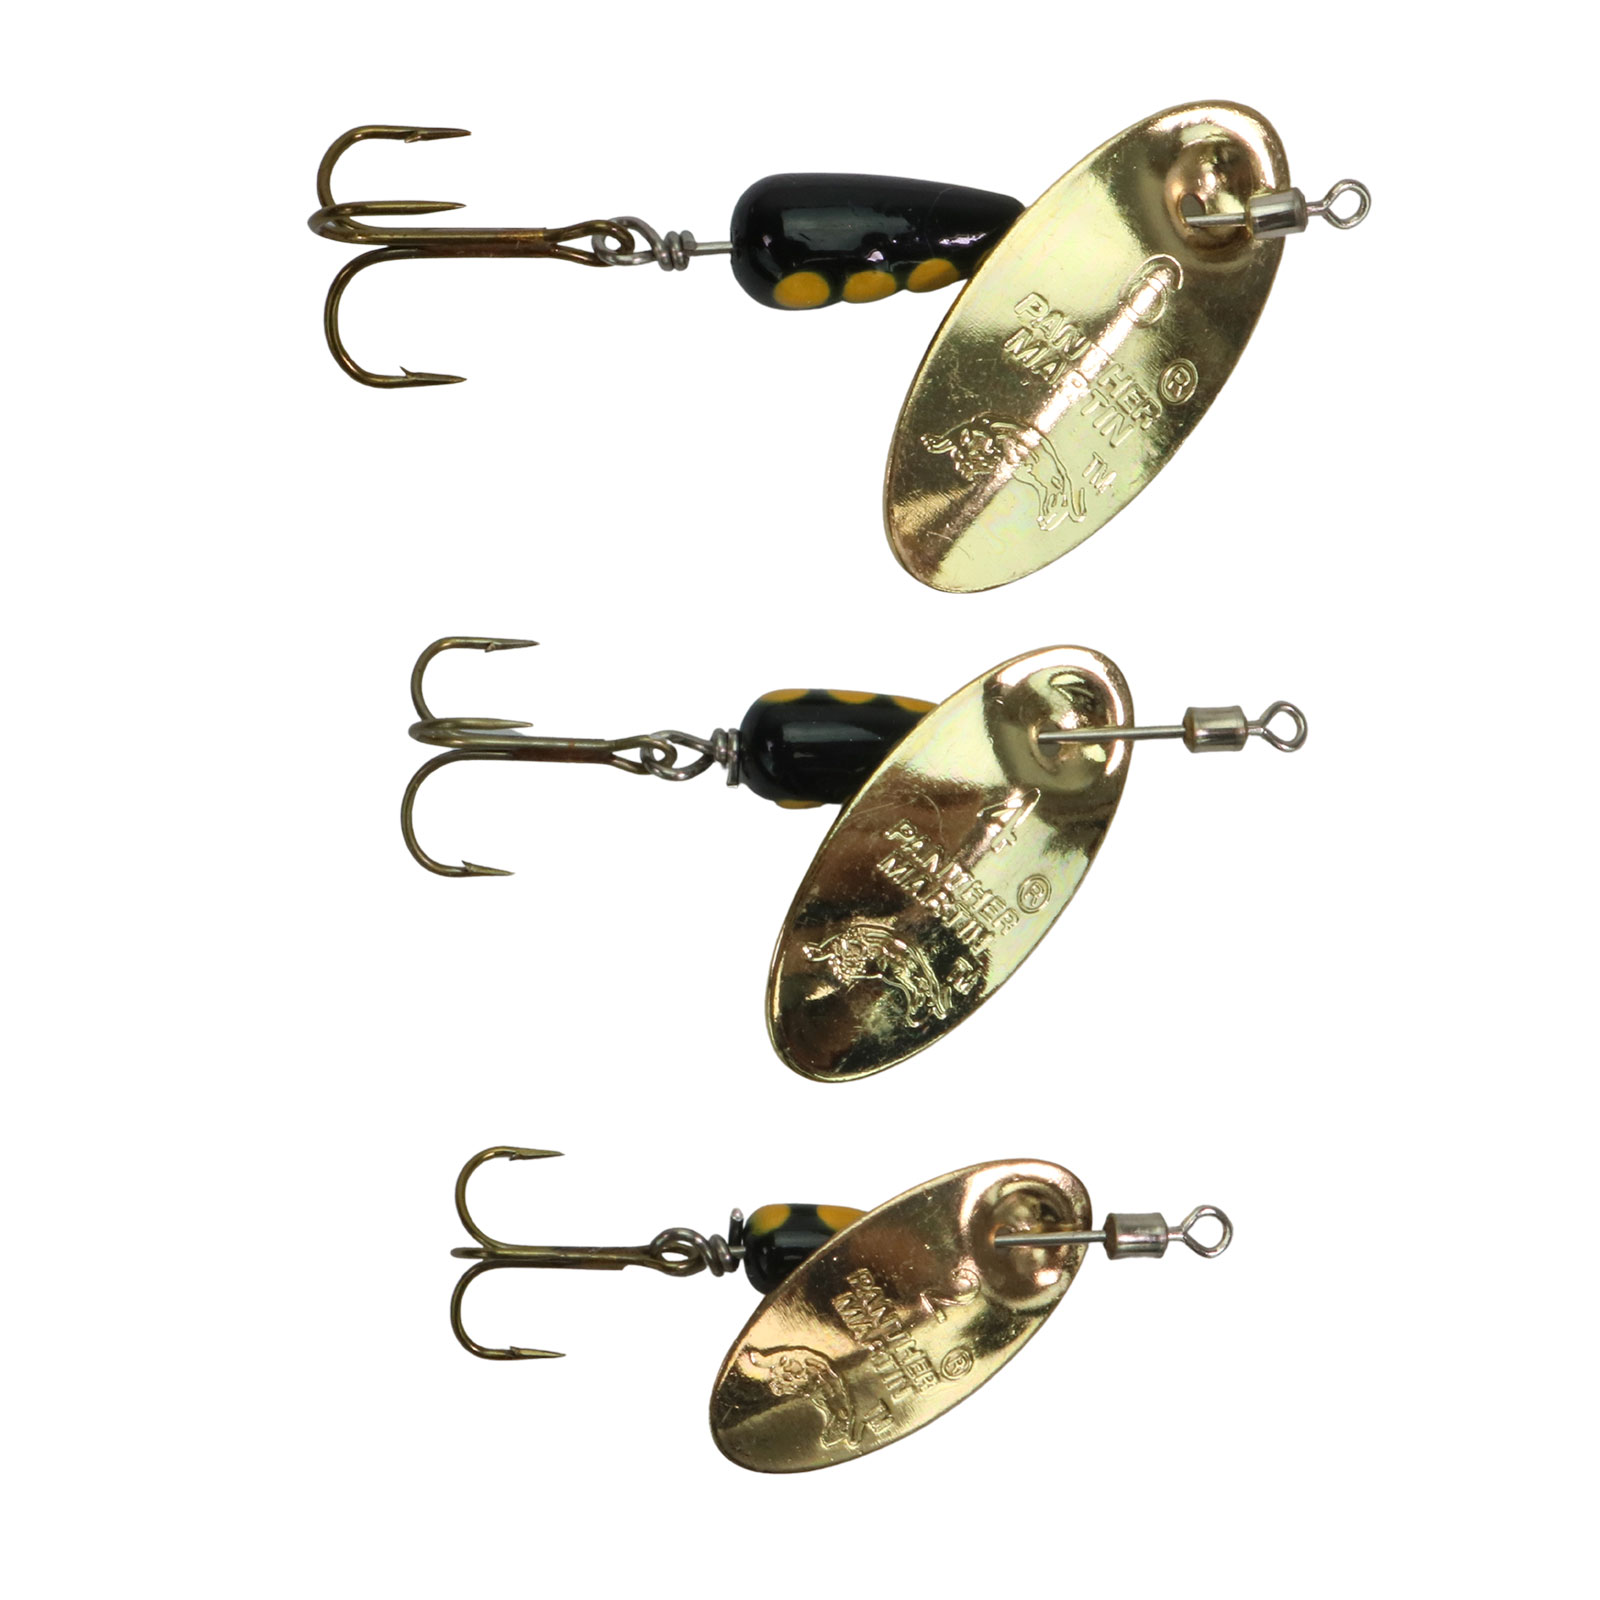 Panther Martin InLine Swivels Change The Landscape of Spinning Lures - Fishing  Tackle Retailer - The Business Magazine of the Sportfishing Industry